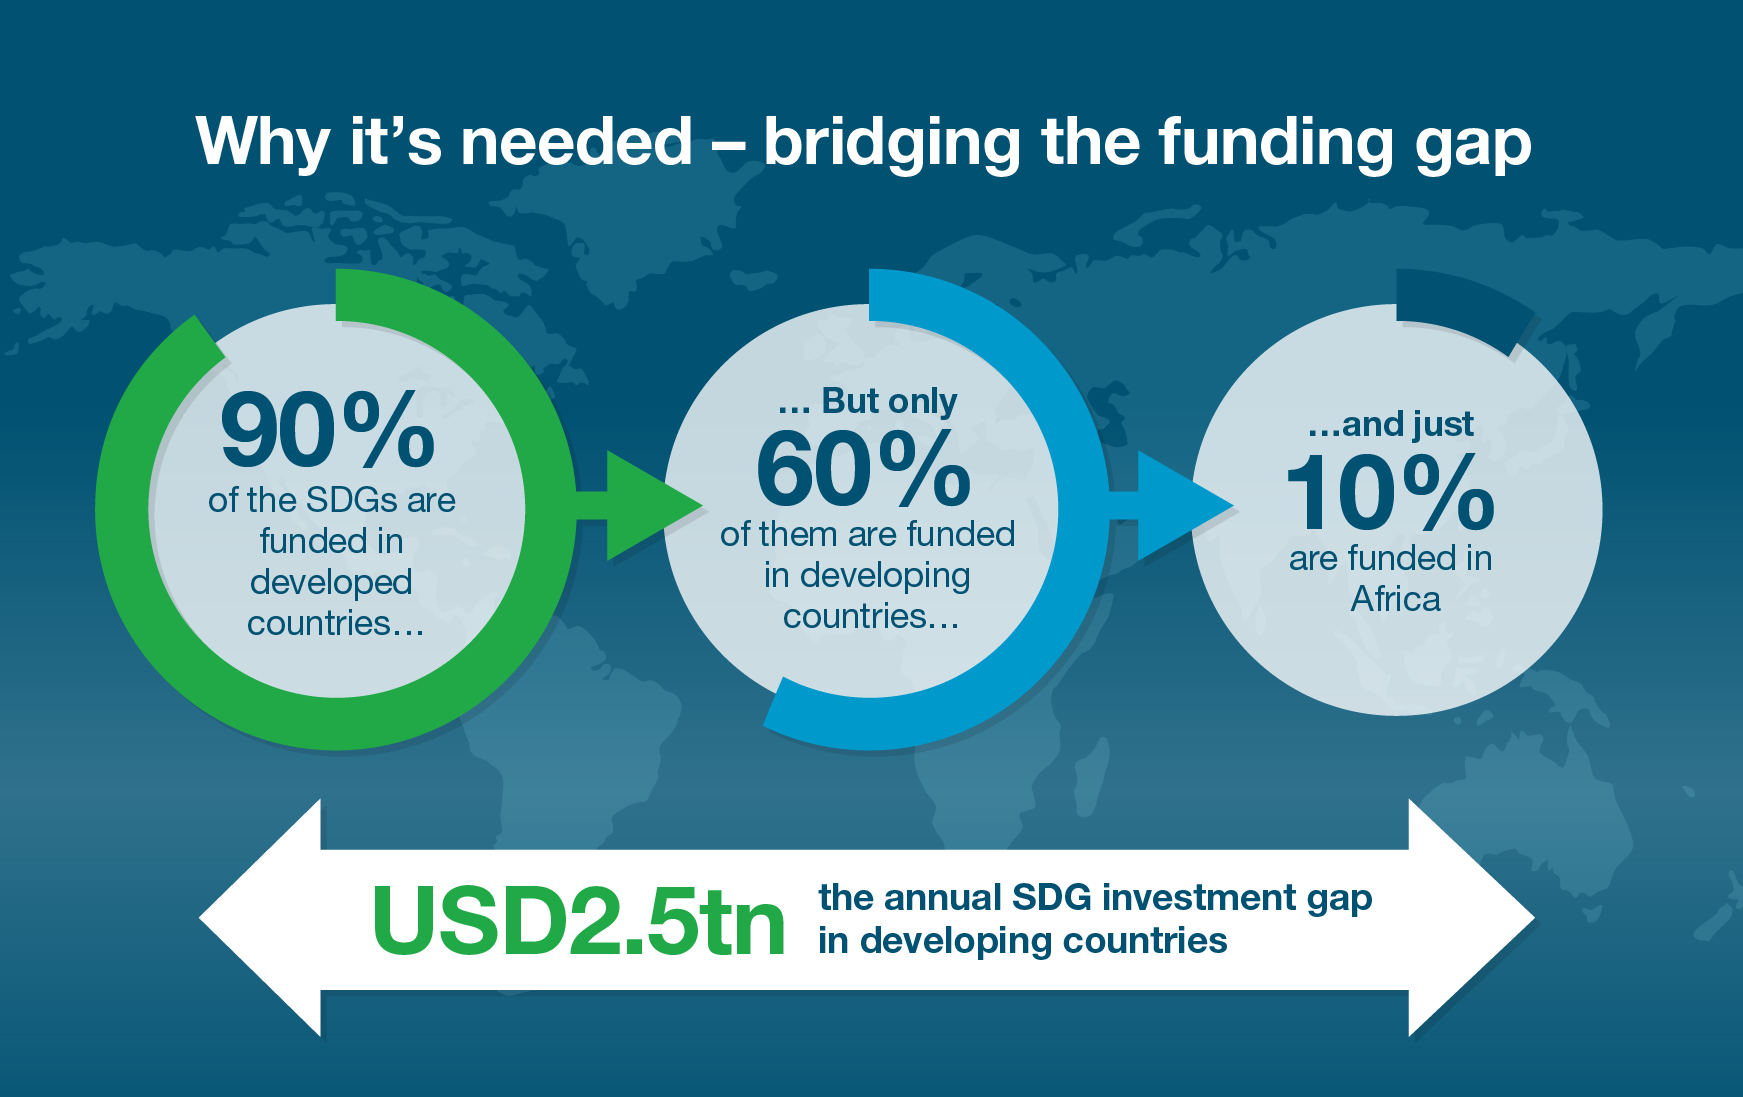 Why it's needed - bridging the funding gap infographic